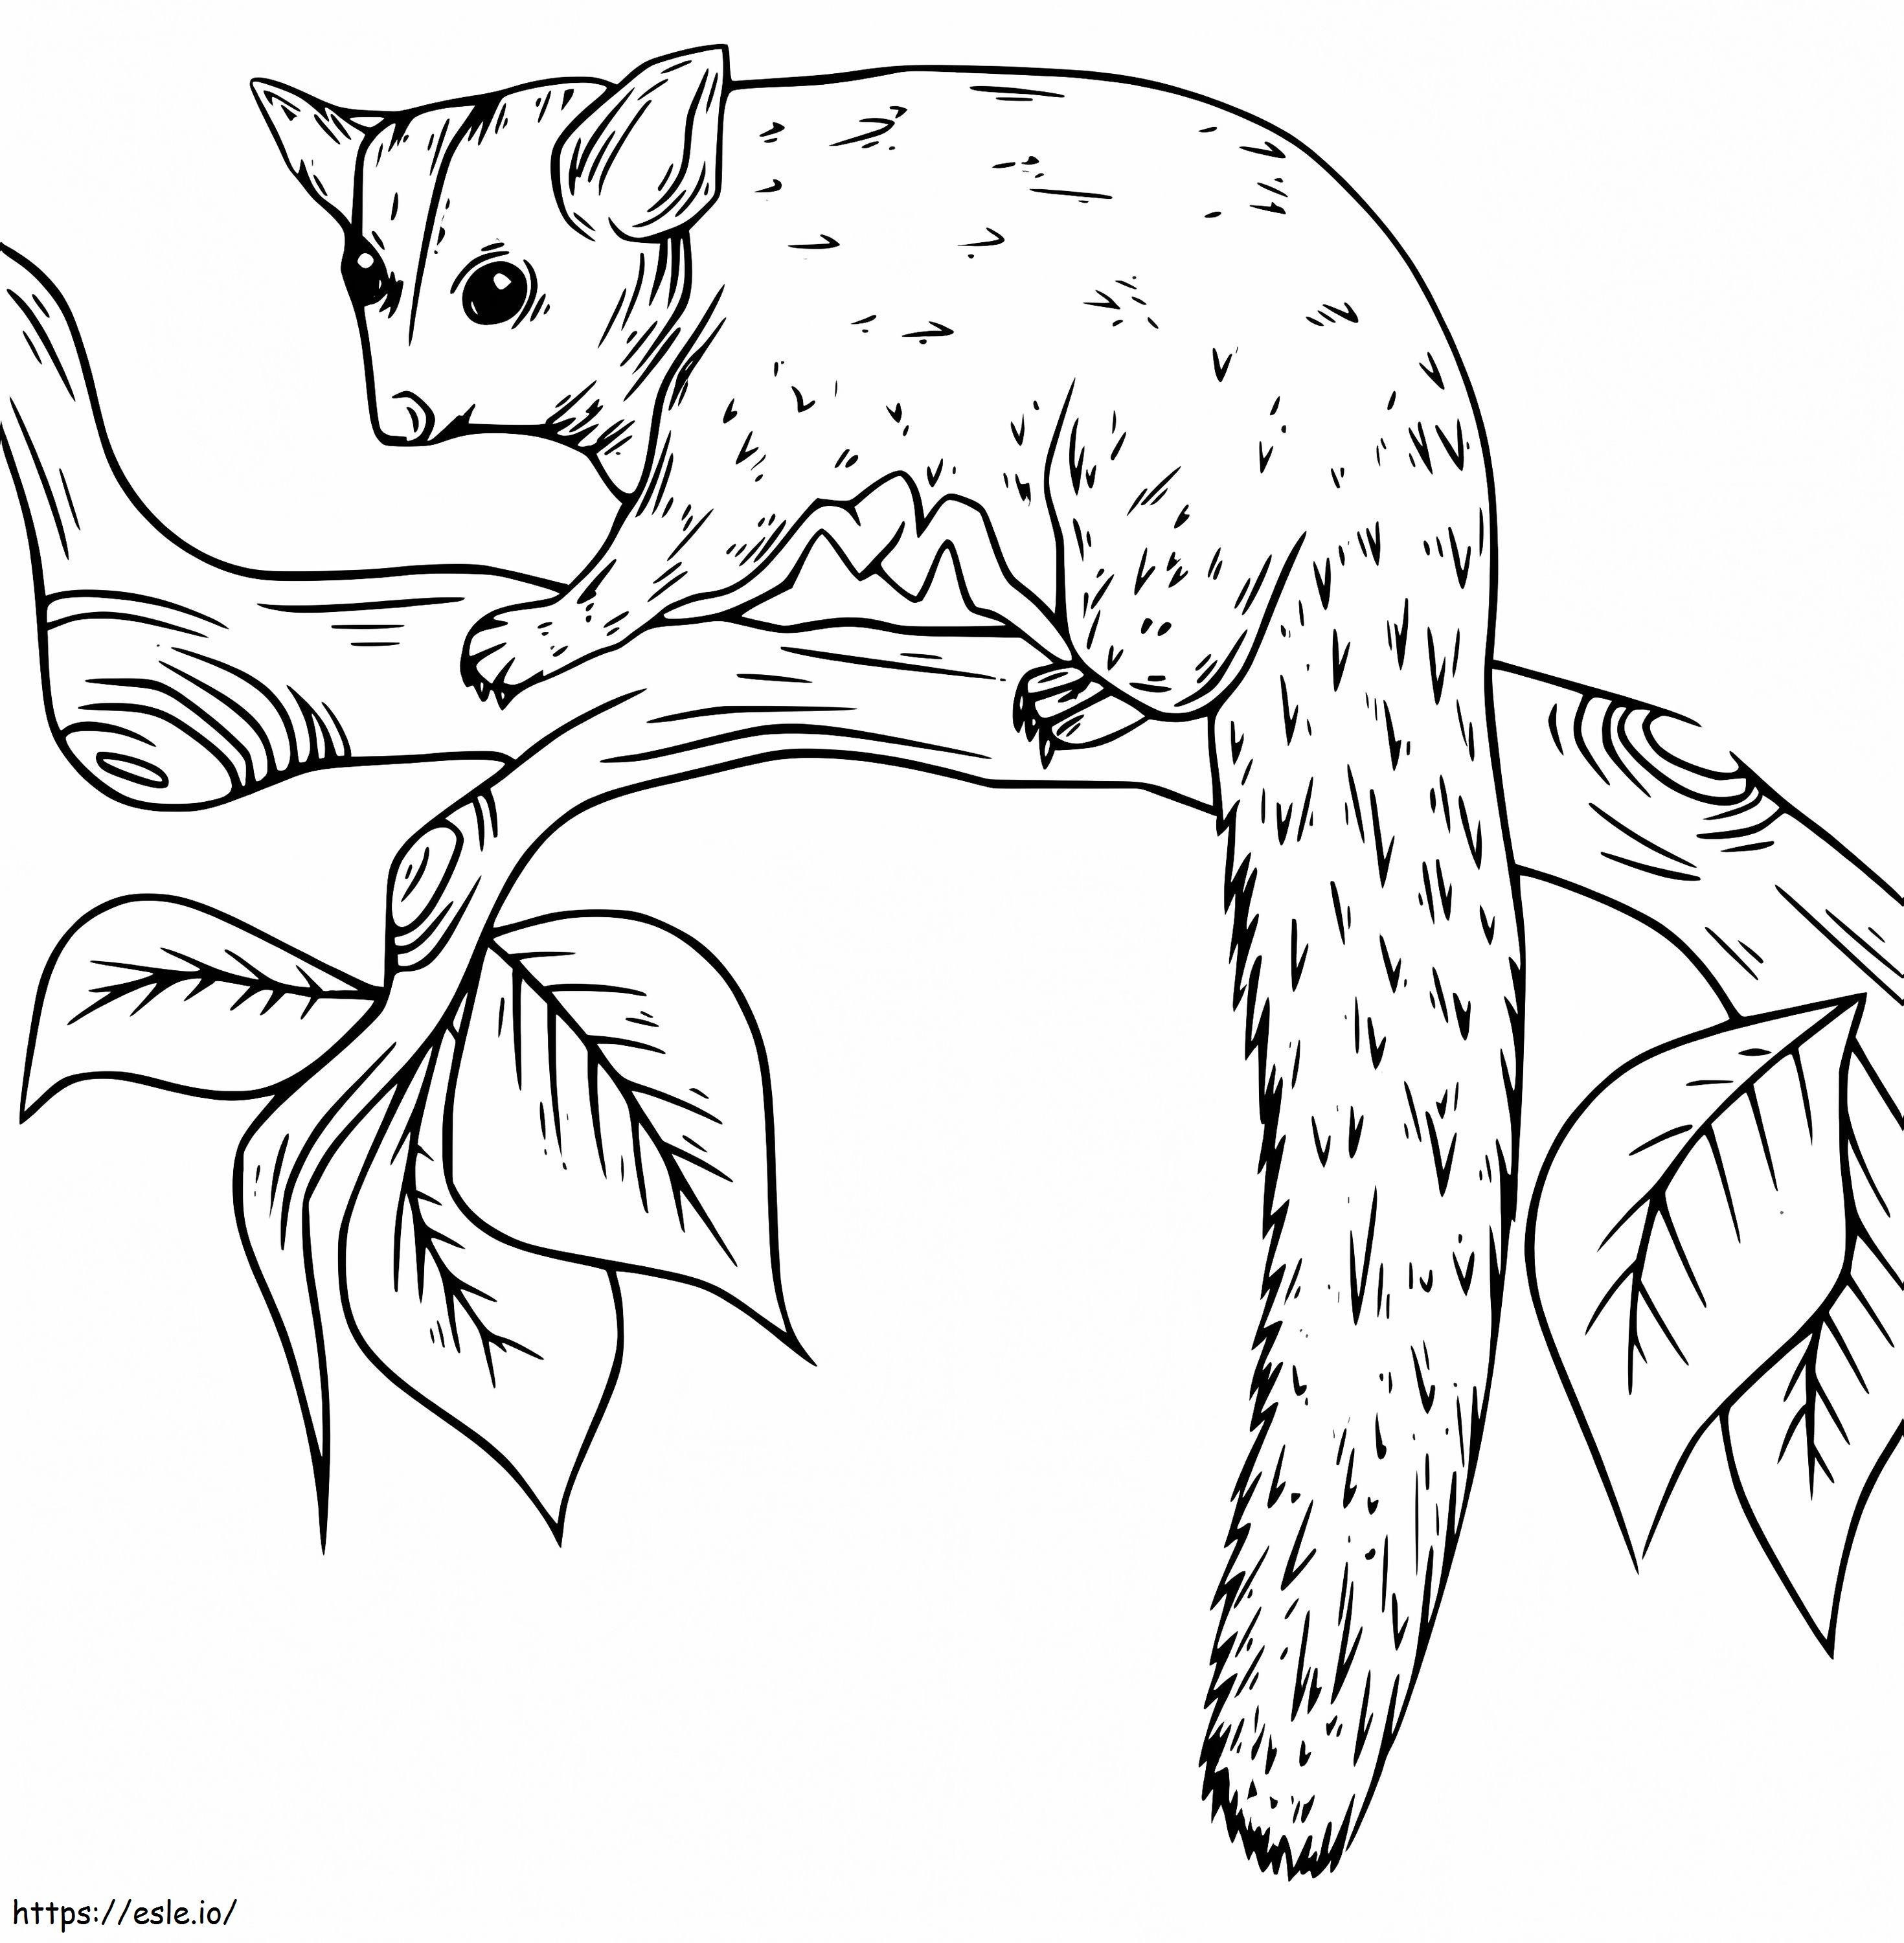 Sugar Glider On A Branch coloring page